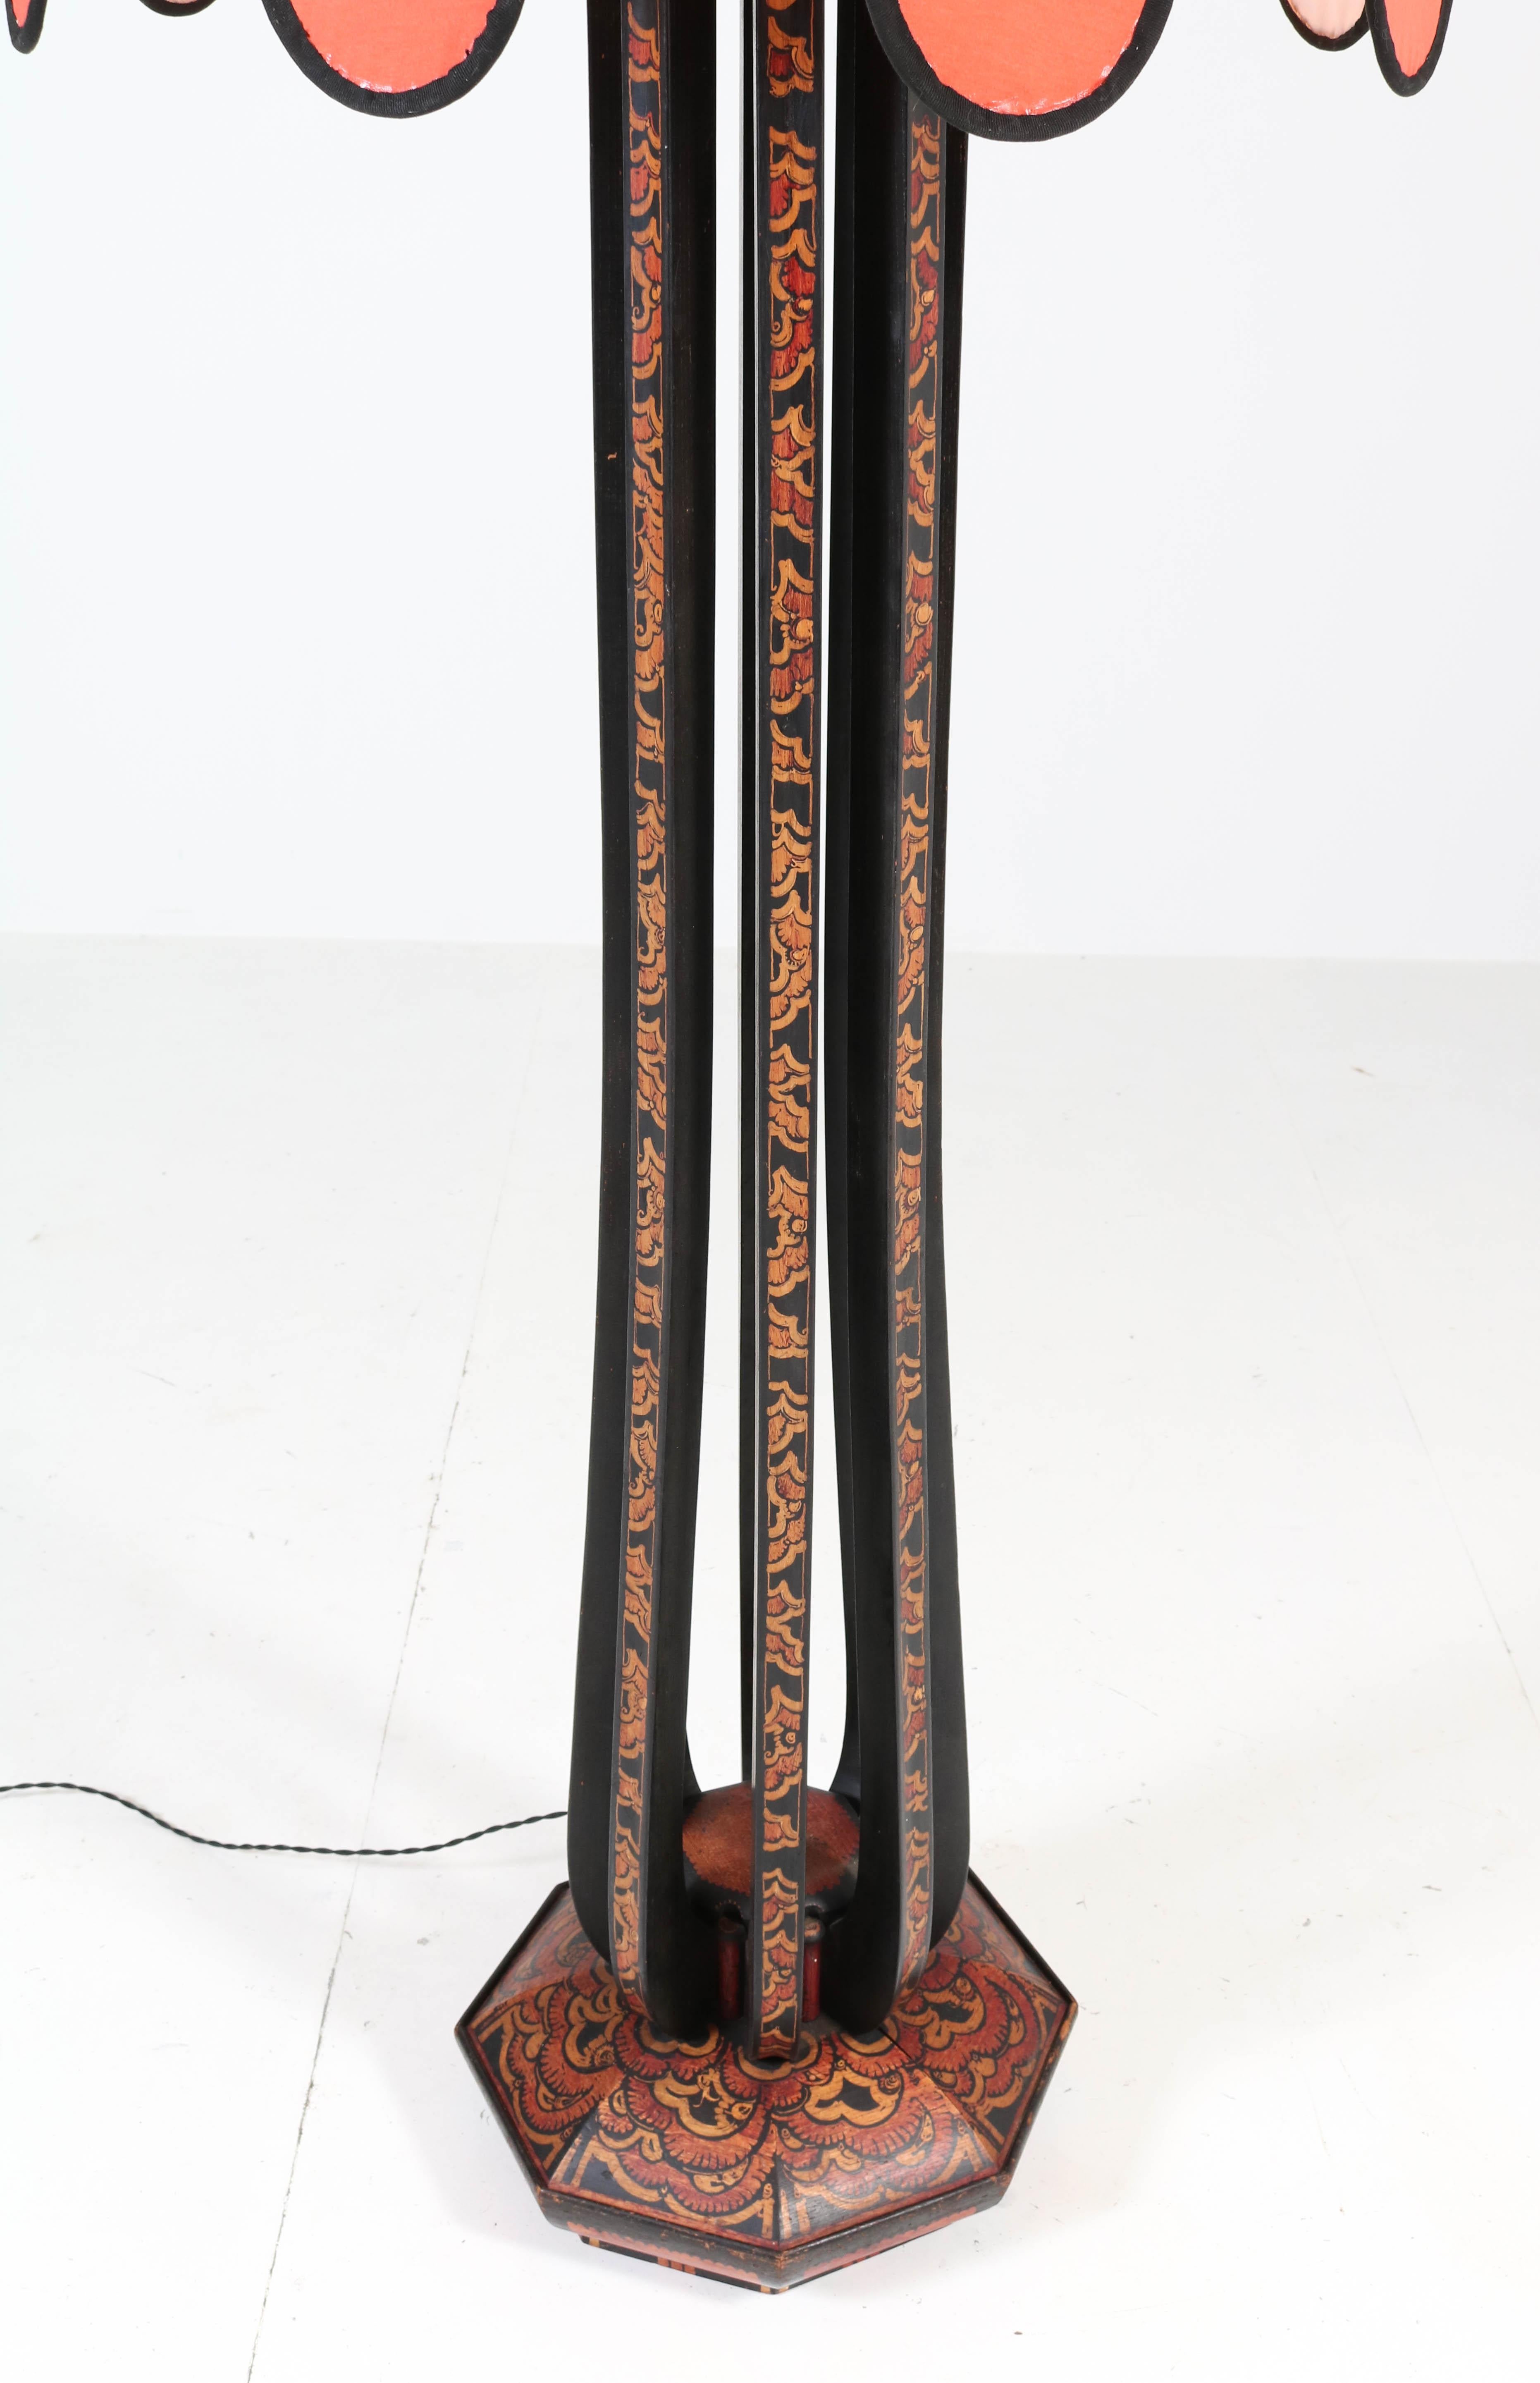 Magnificent and rare Art Deco Amsterdam School floor lamp.
Design by Louis Bogtman Hilversum.
Striking Dutch design from the 1920s.
Fruitwood with original batik decoration.
Re-upholstered shade with shantung silk.
Rewired with one socket for